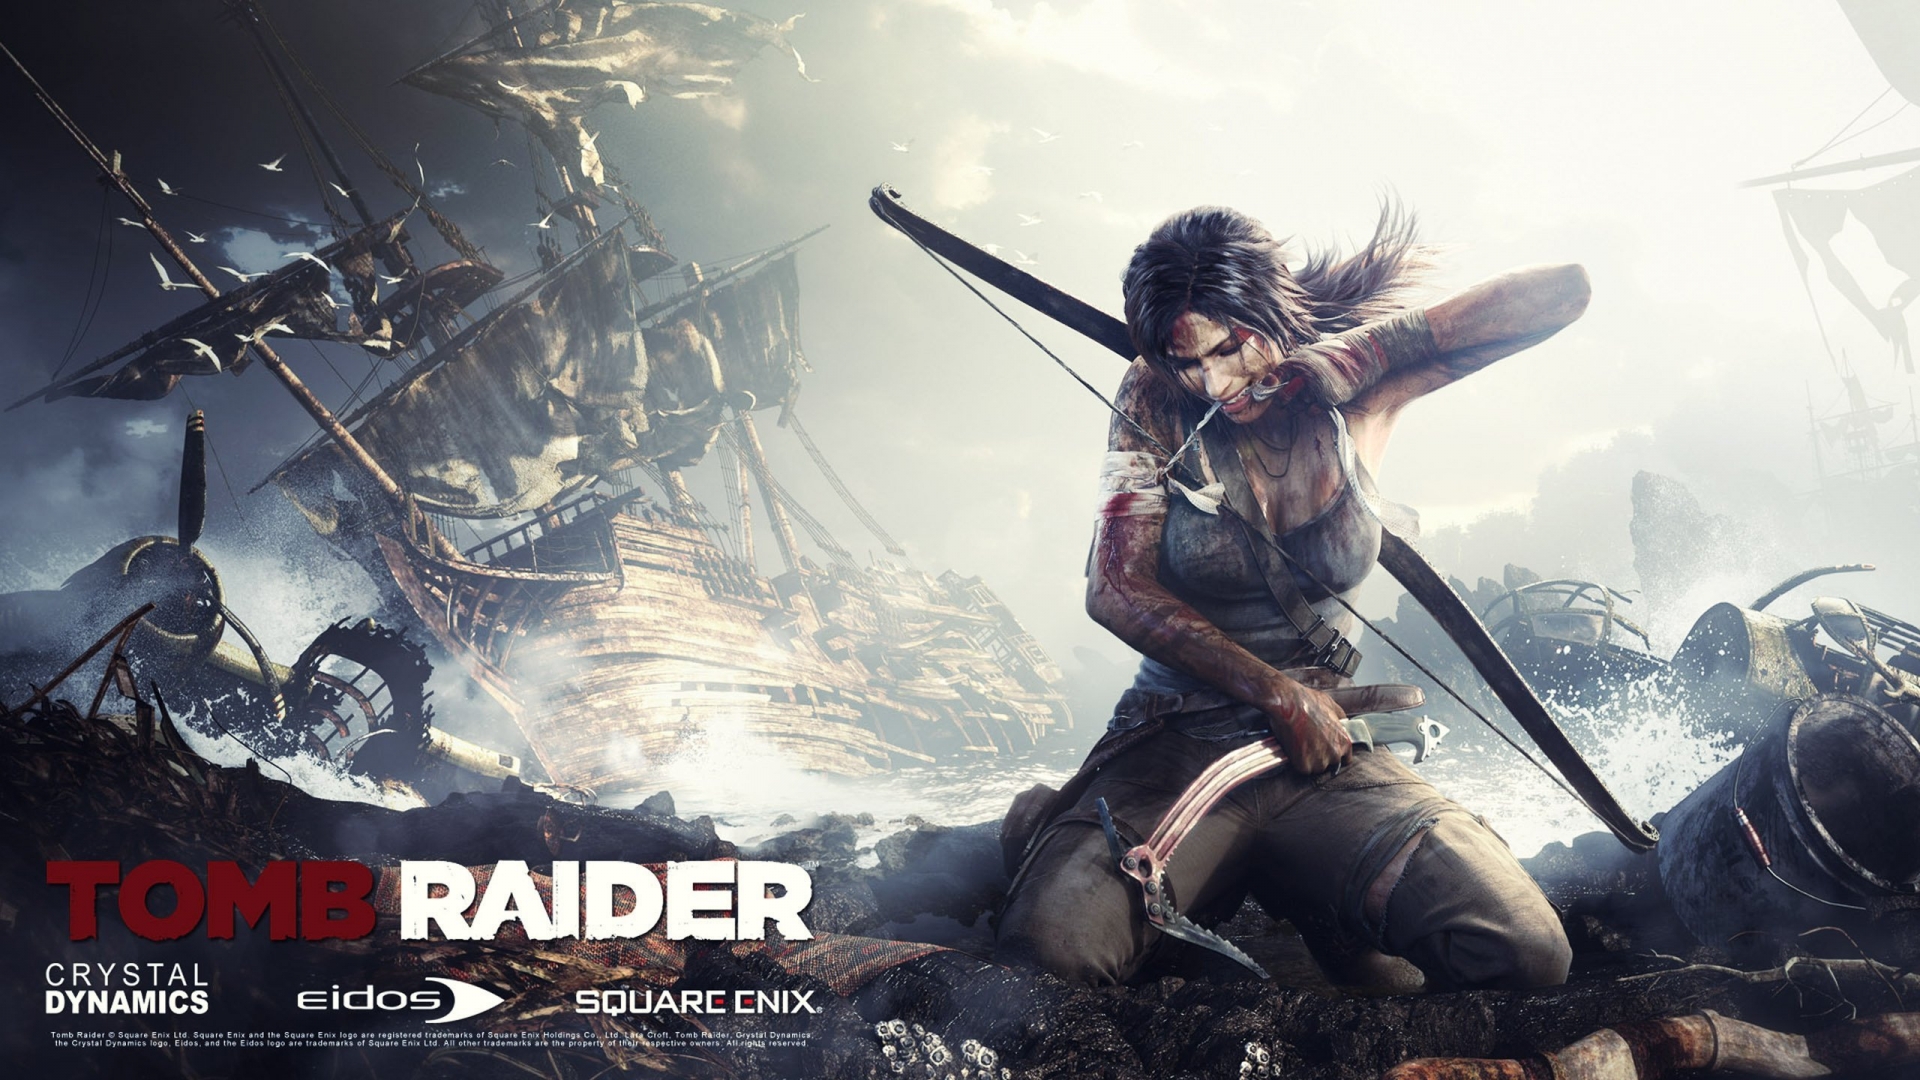 Tomb Raider Weapons Unlocked for 1920 x 1080 HDTV 1080p resolution